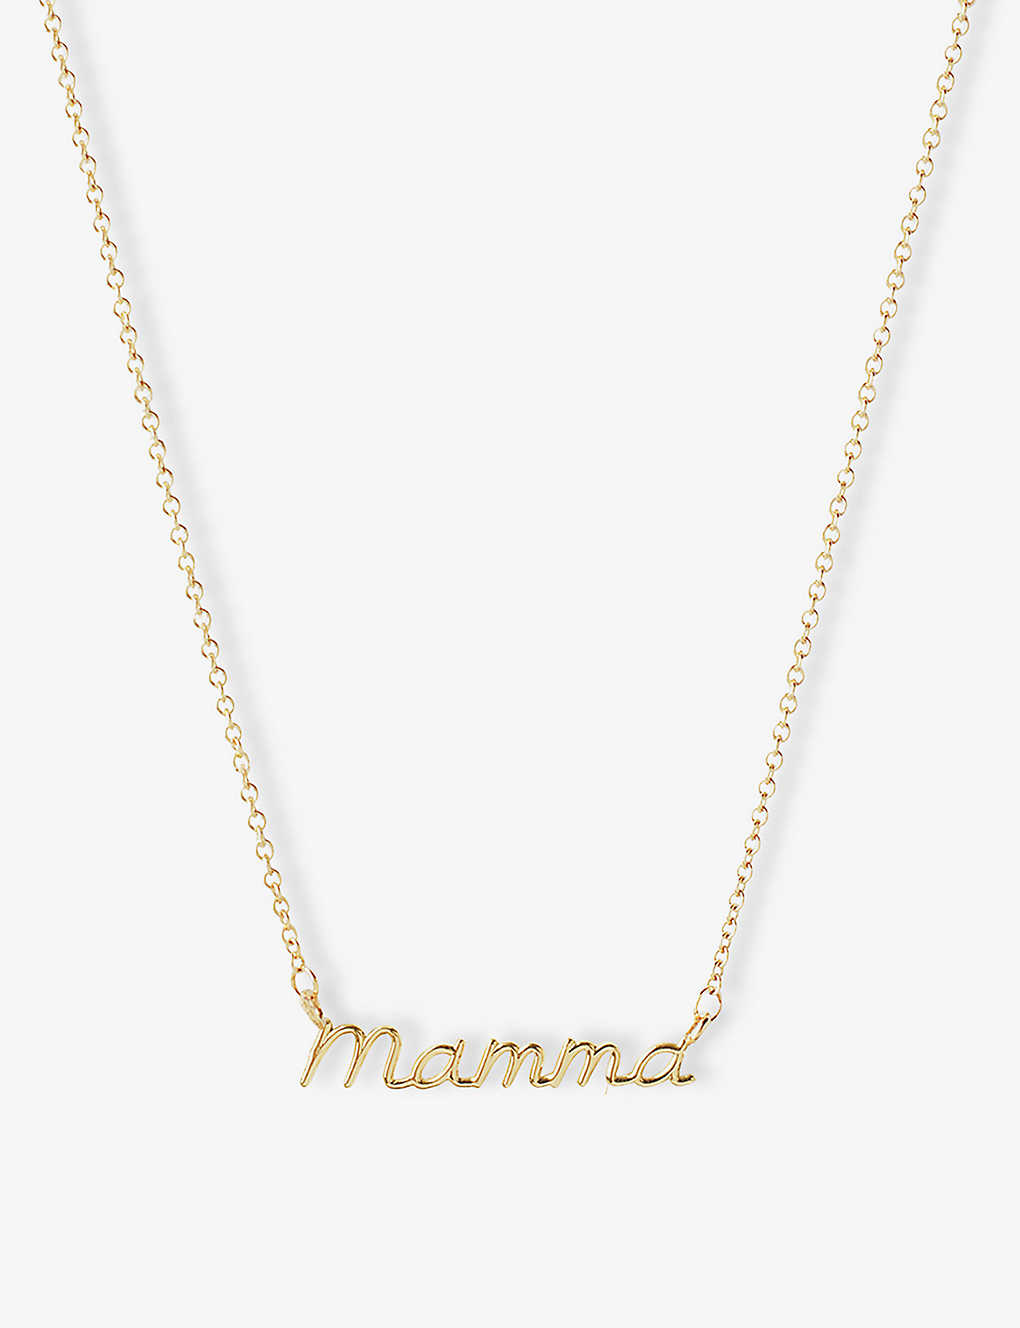 The Alkemistry Womens Yellow Gold Mamma 18ct Yellow-gold Necklace